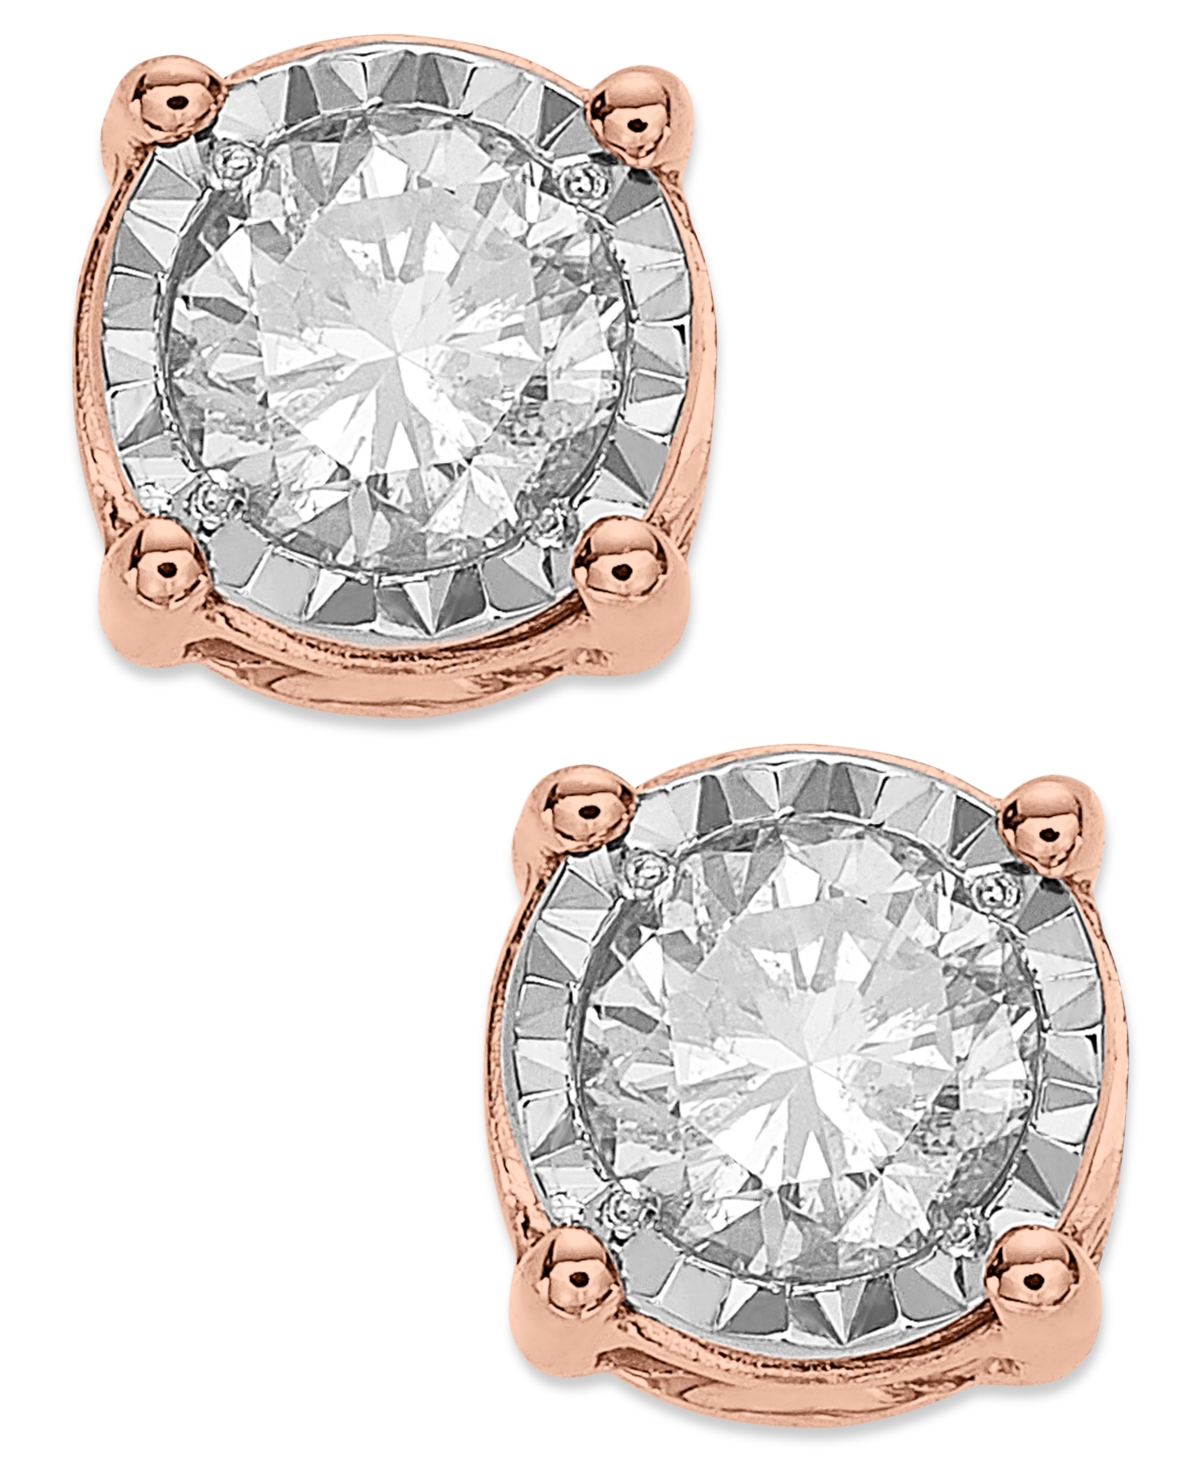 Diamond Stud Earrings (3/4 ct. t.w.) in 14k White, Yellow or Rose Gold - Rose Gold